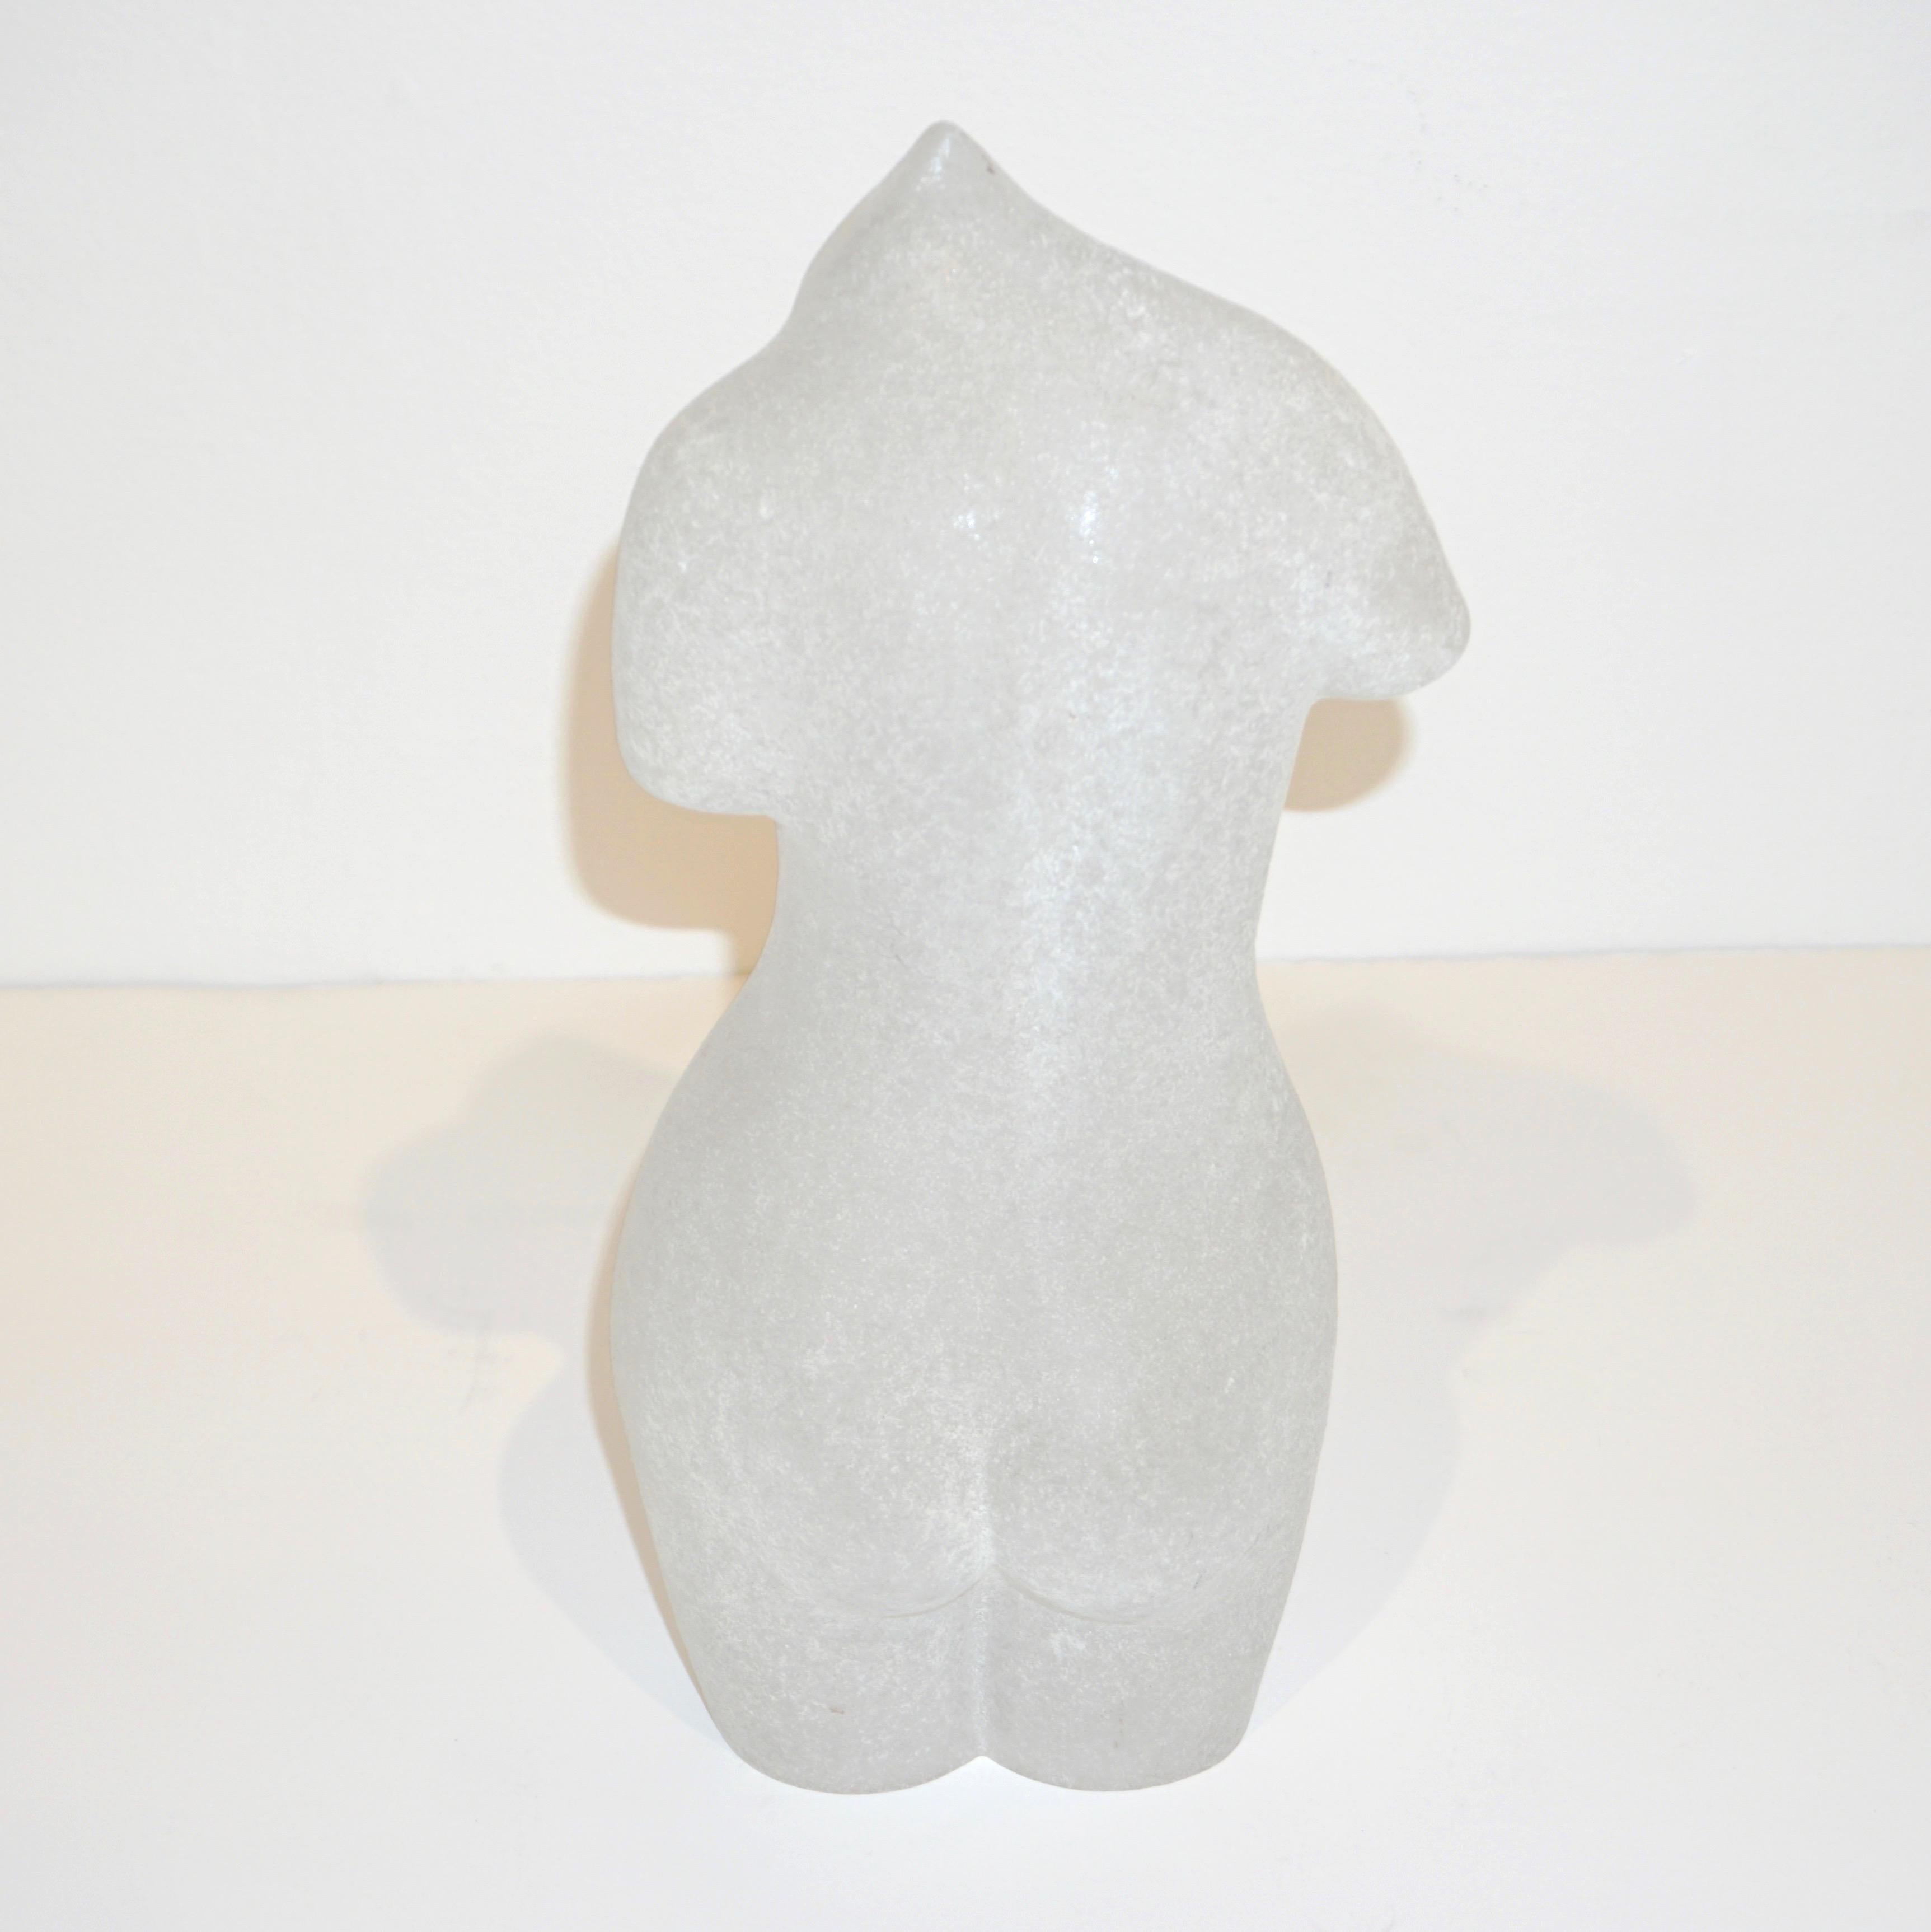 Attributed to Vetreria Cenedese this frosted vintage Venetian Minimalist sculpture is of a nude woman in a modernist interpretation. Created in blown crystal clear Murano glass worked with the special Scavo technique, typical of mid-20th century